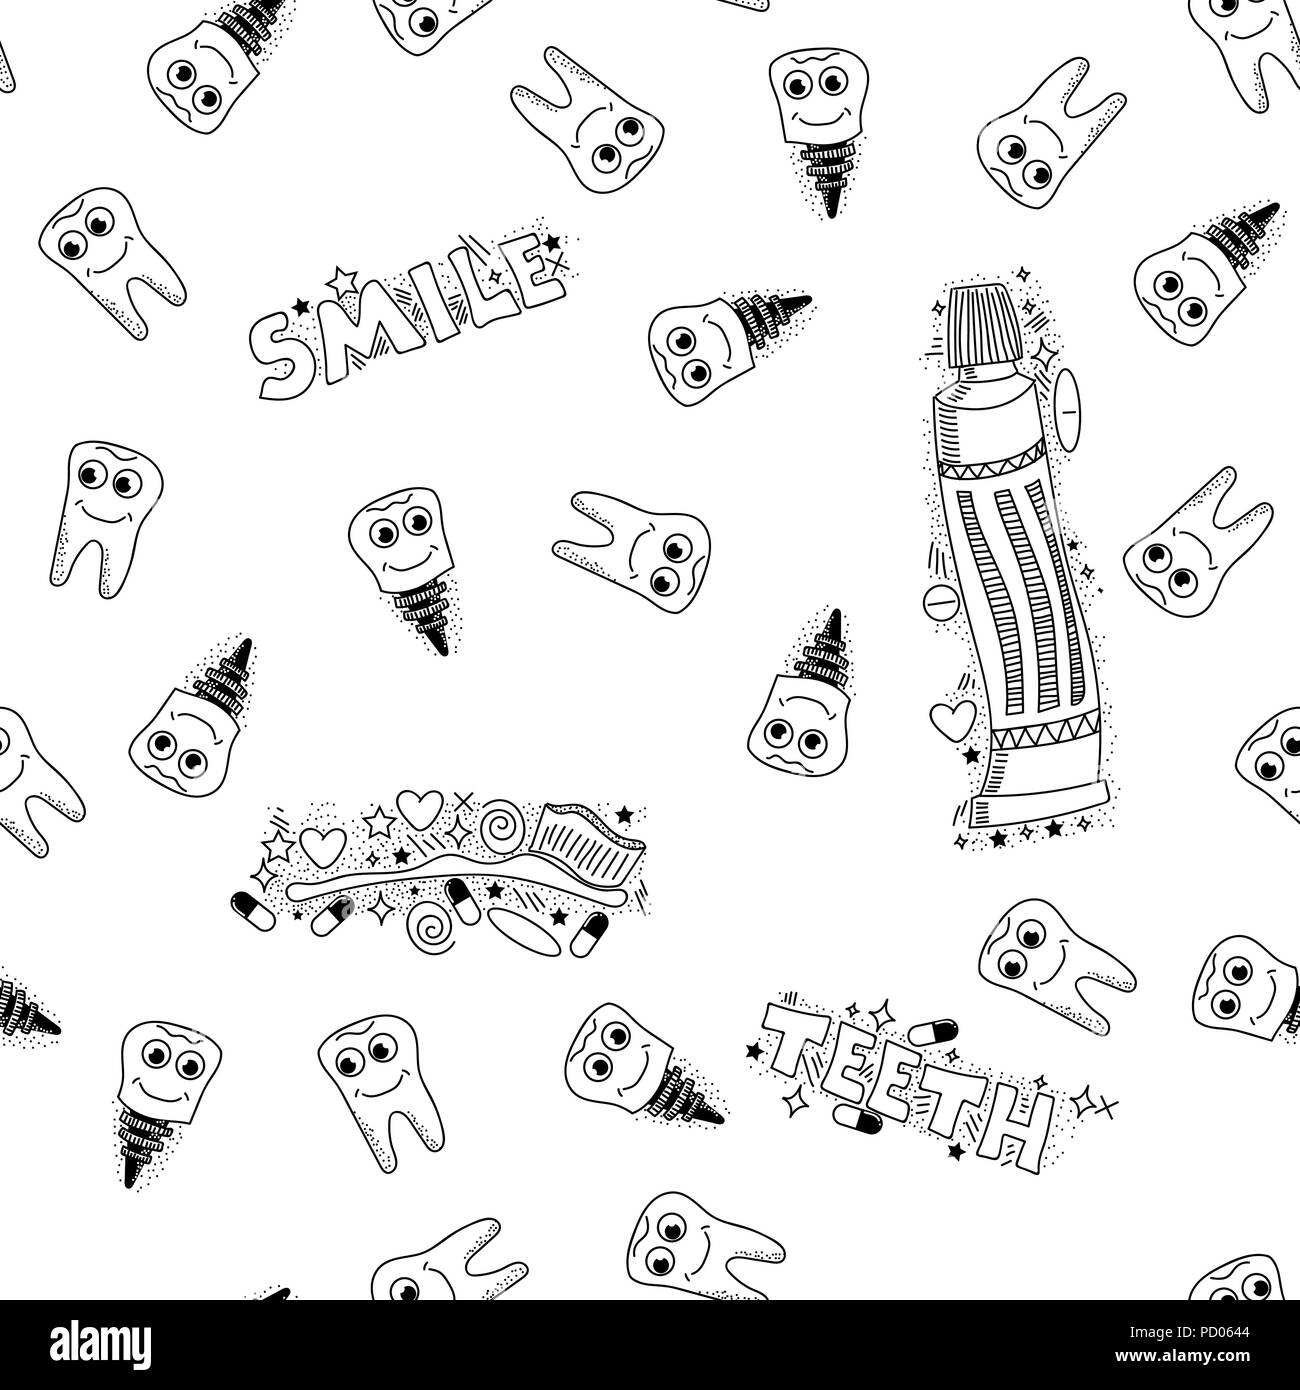 Doodle Medical Pattern Stock Vector